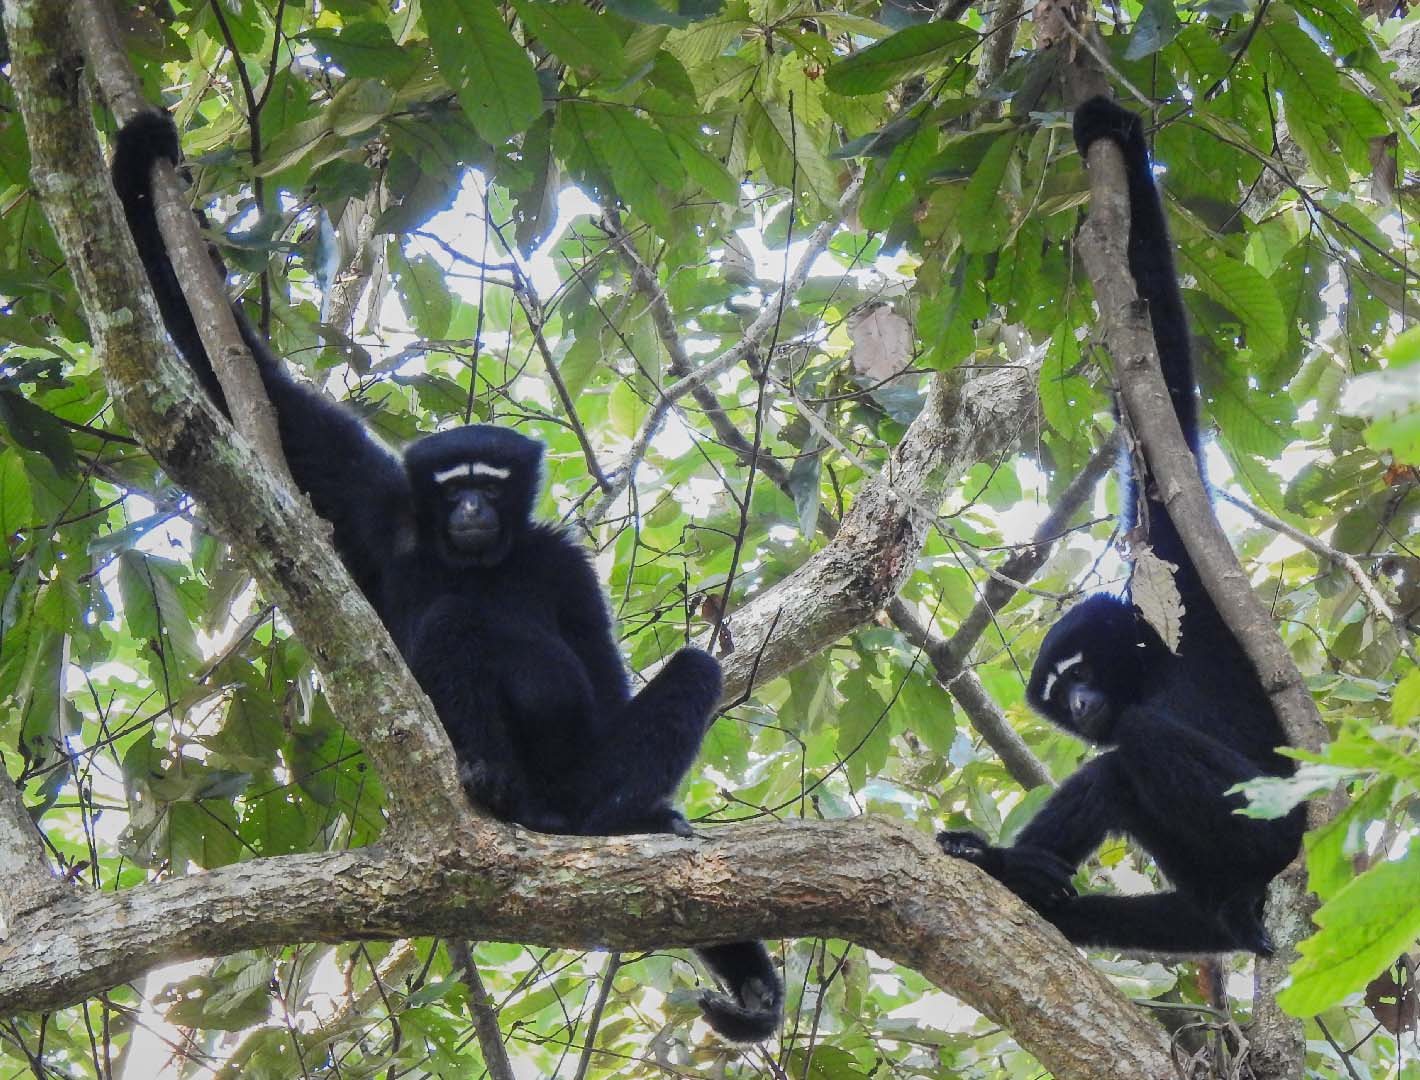 Two black gibbons with thick white eyebrows perched in a leafy tree